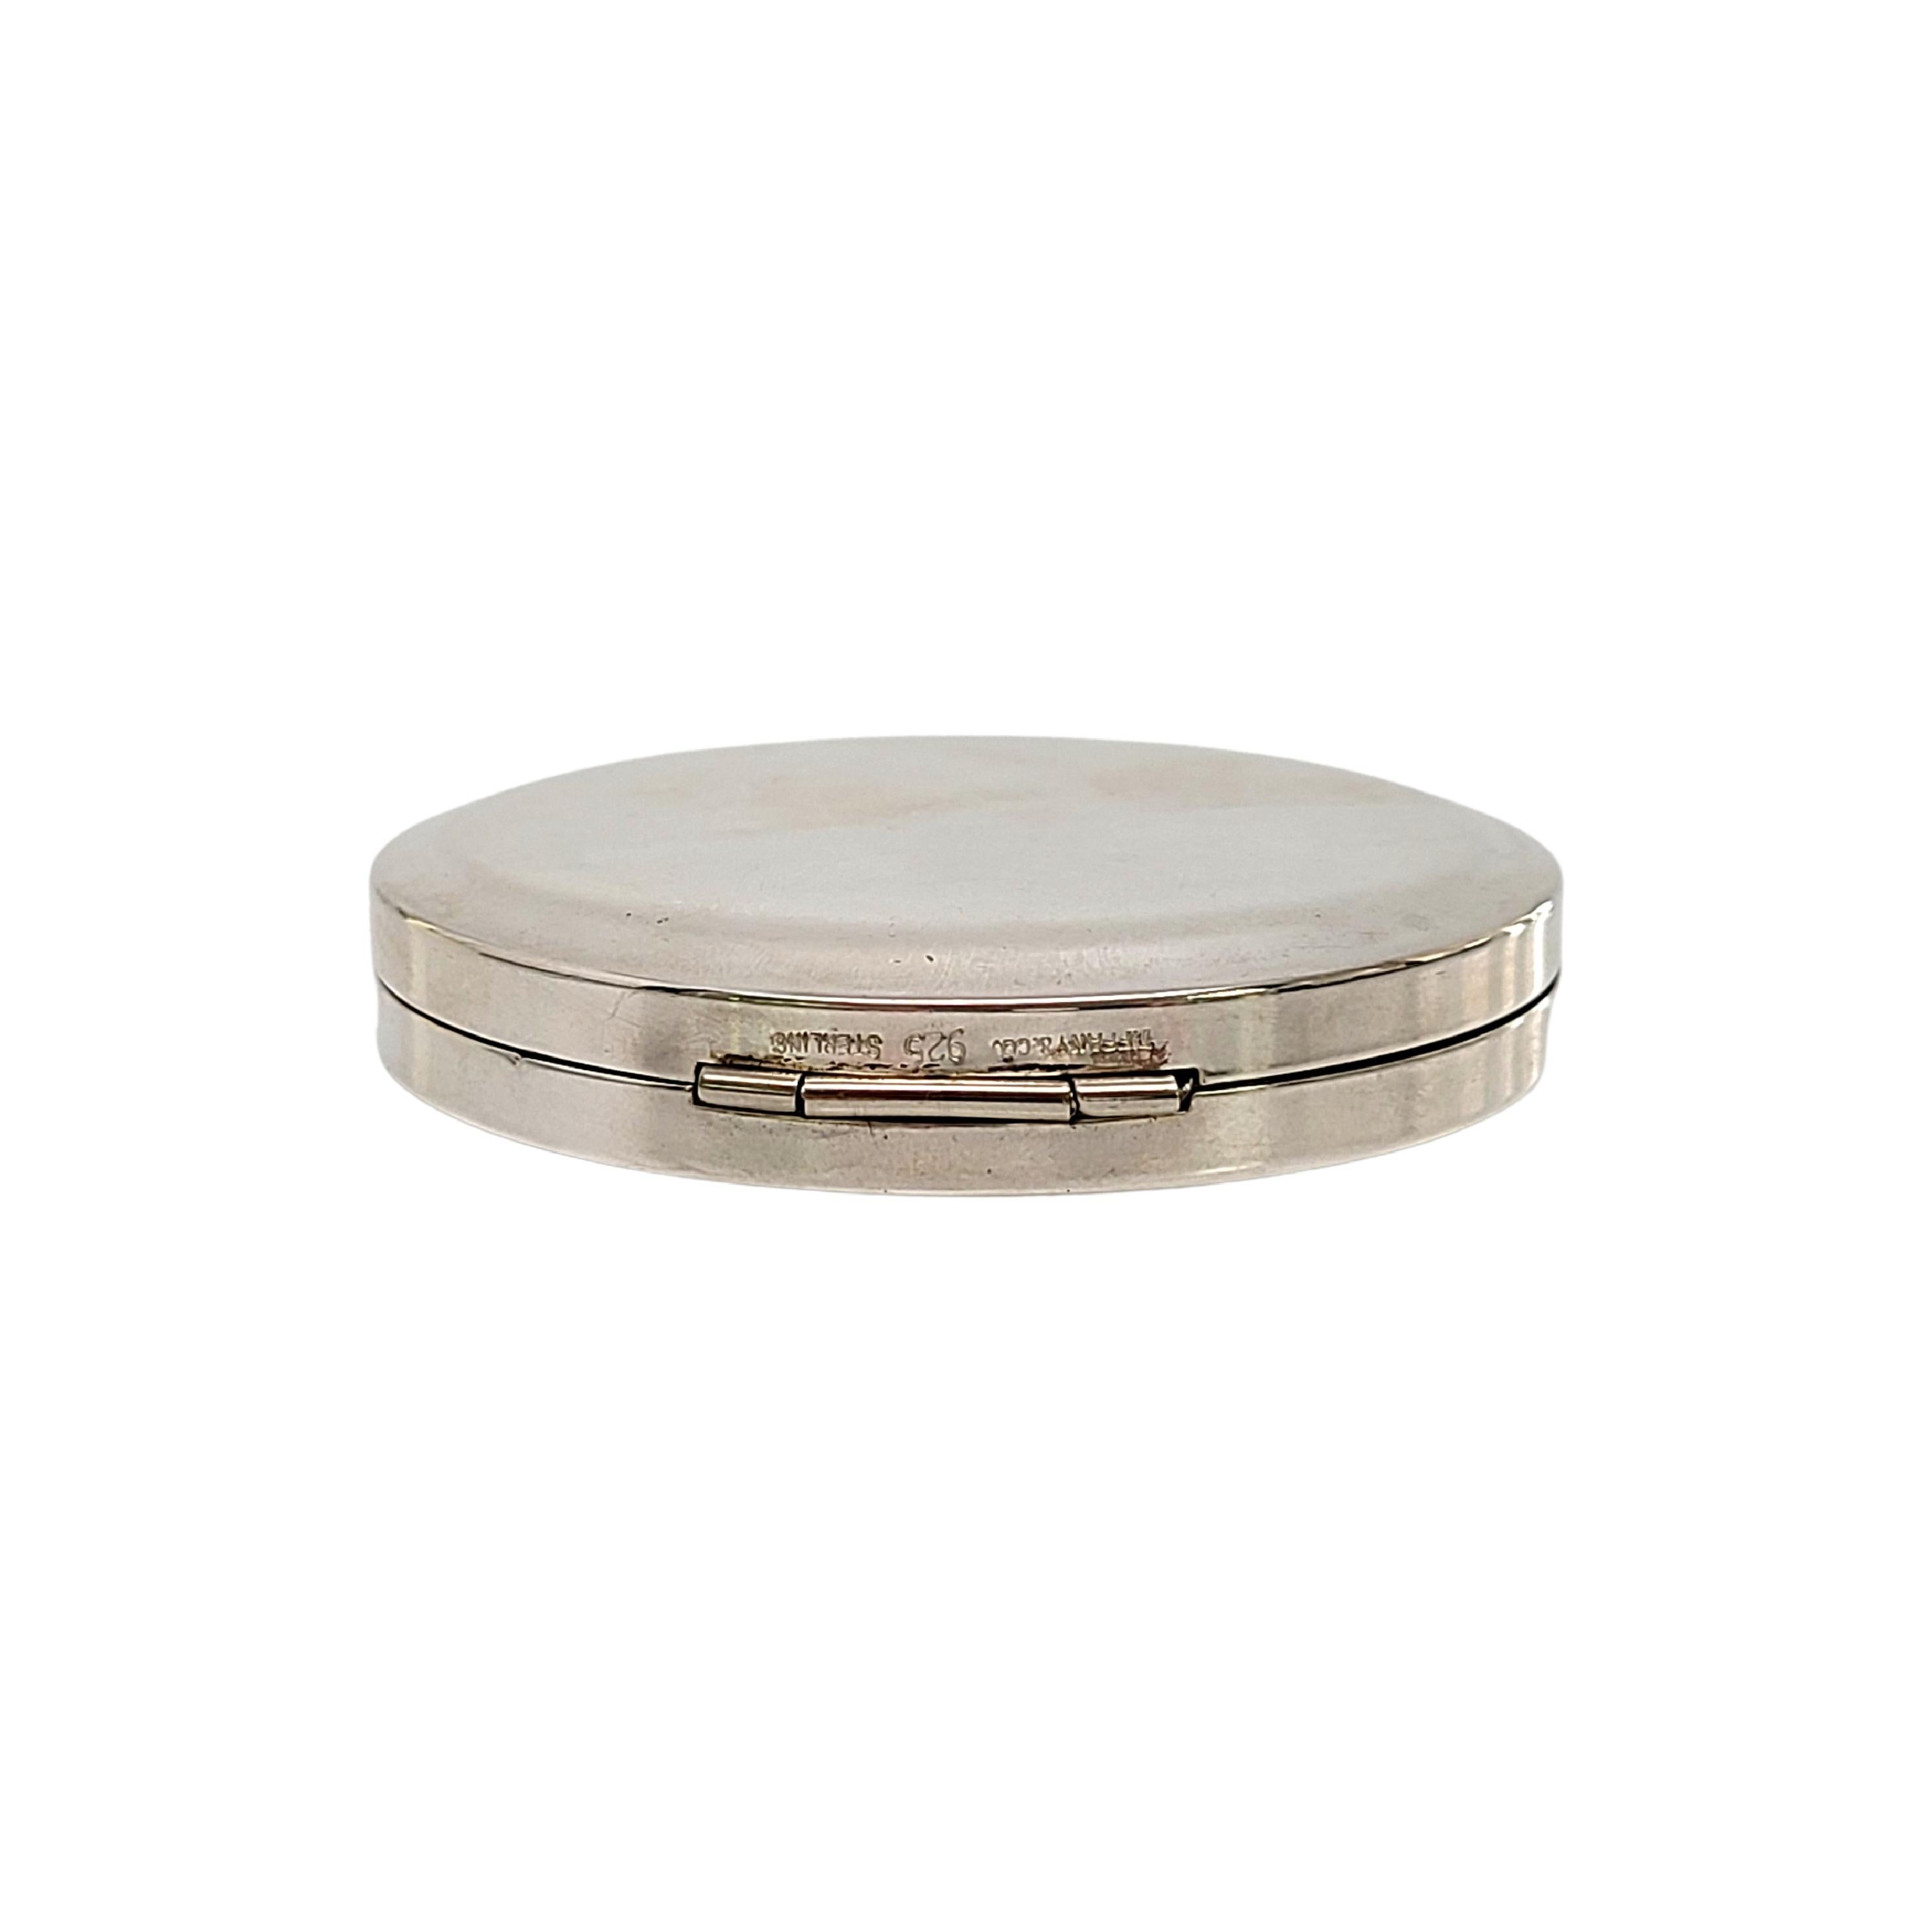 sterling silver compact mirror